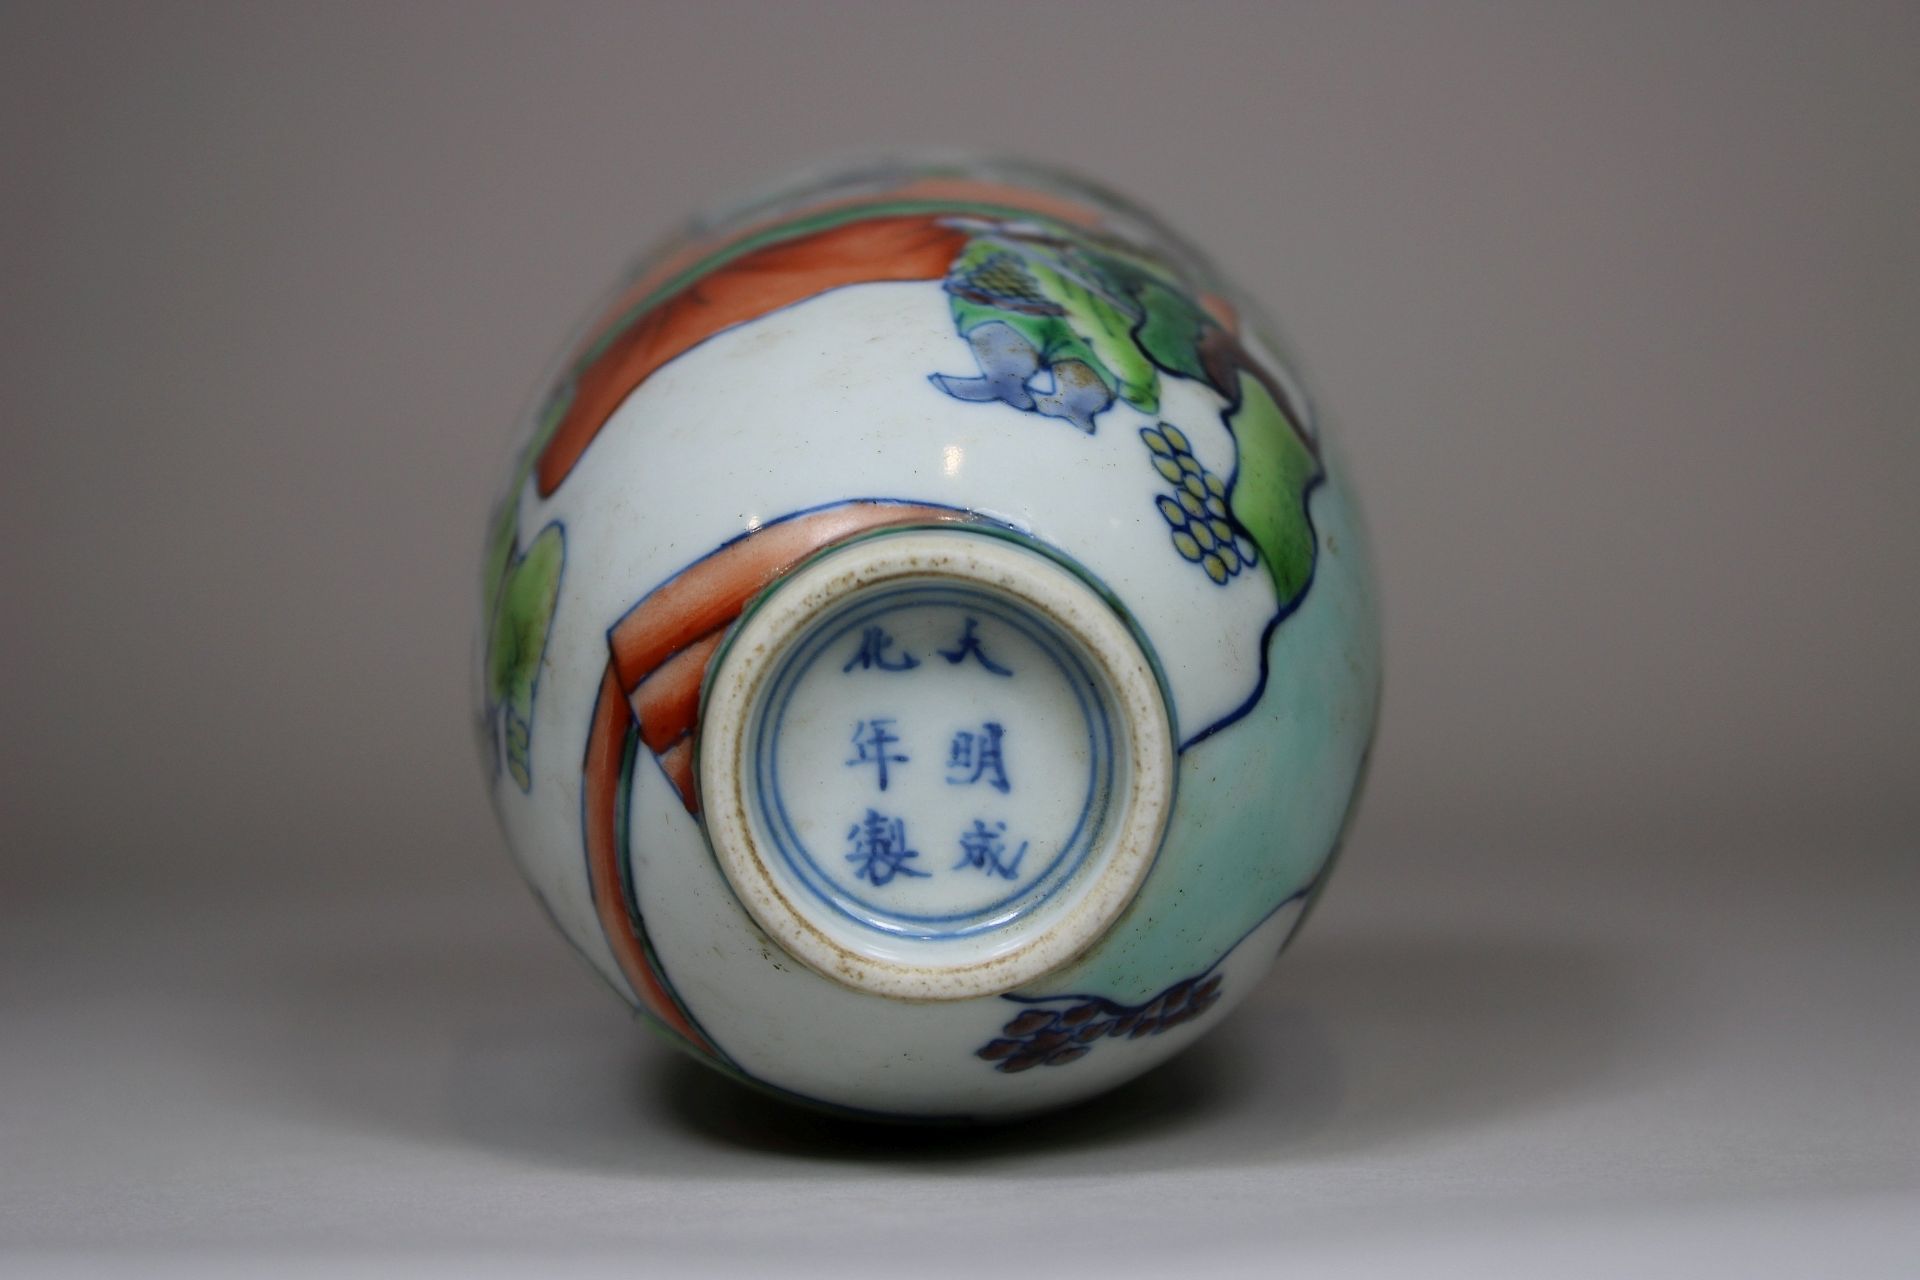 Teacup, China, Ming Dynastie - Image 4 of 5